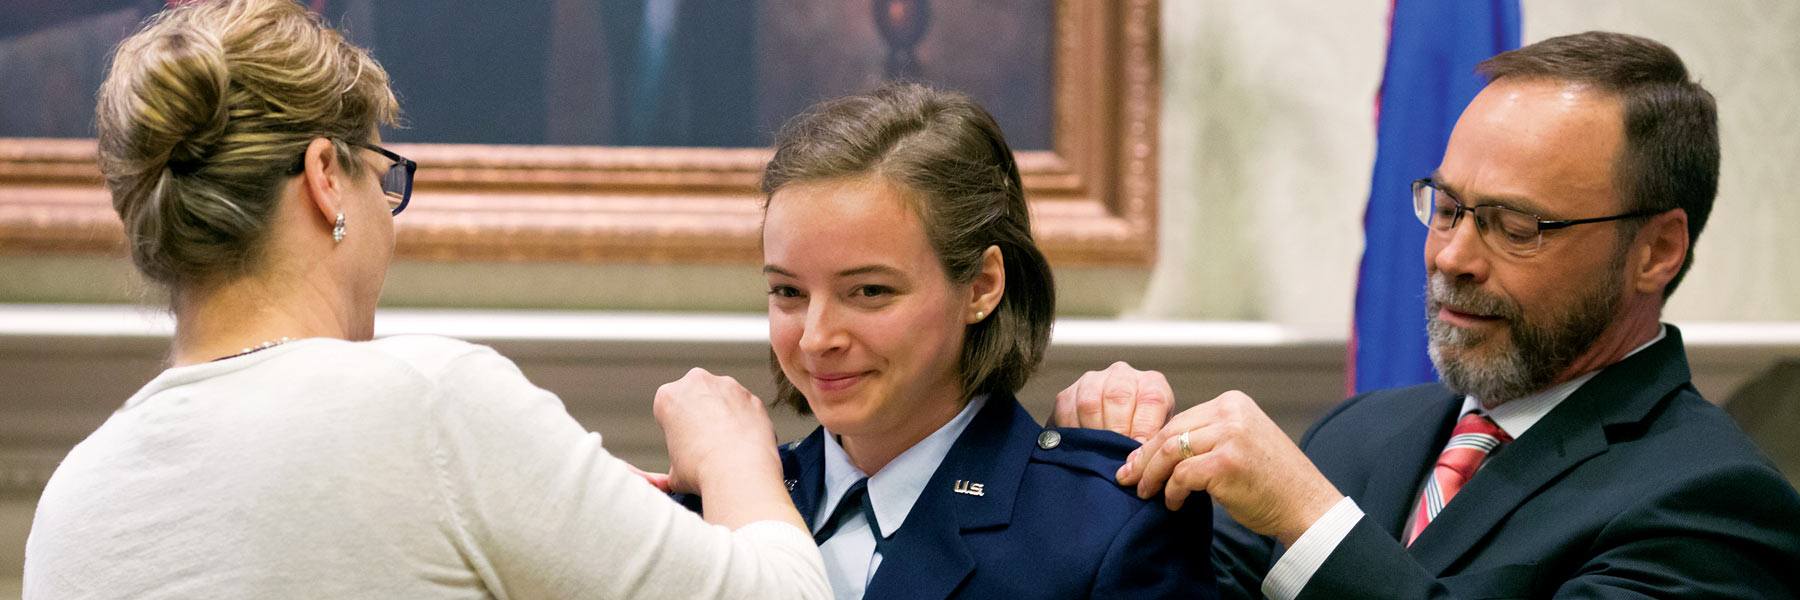 A female cadet receives pins at the commissioning ceremony.